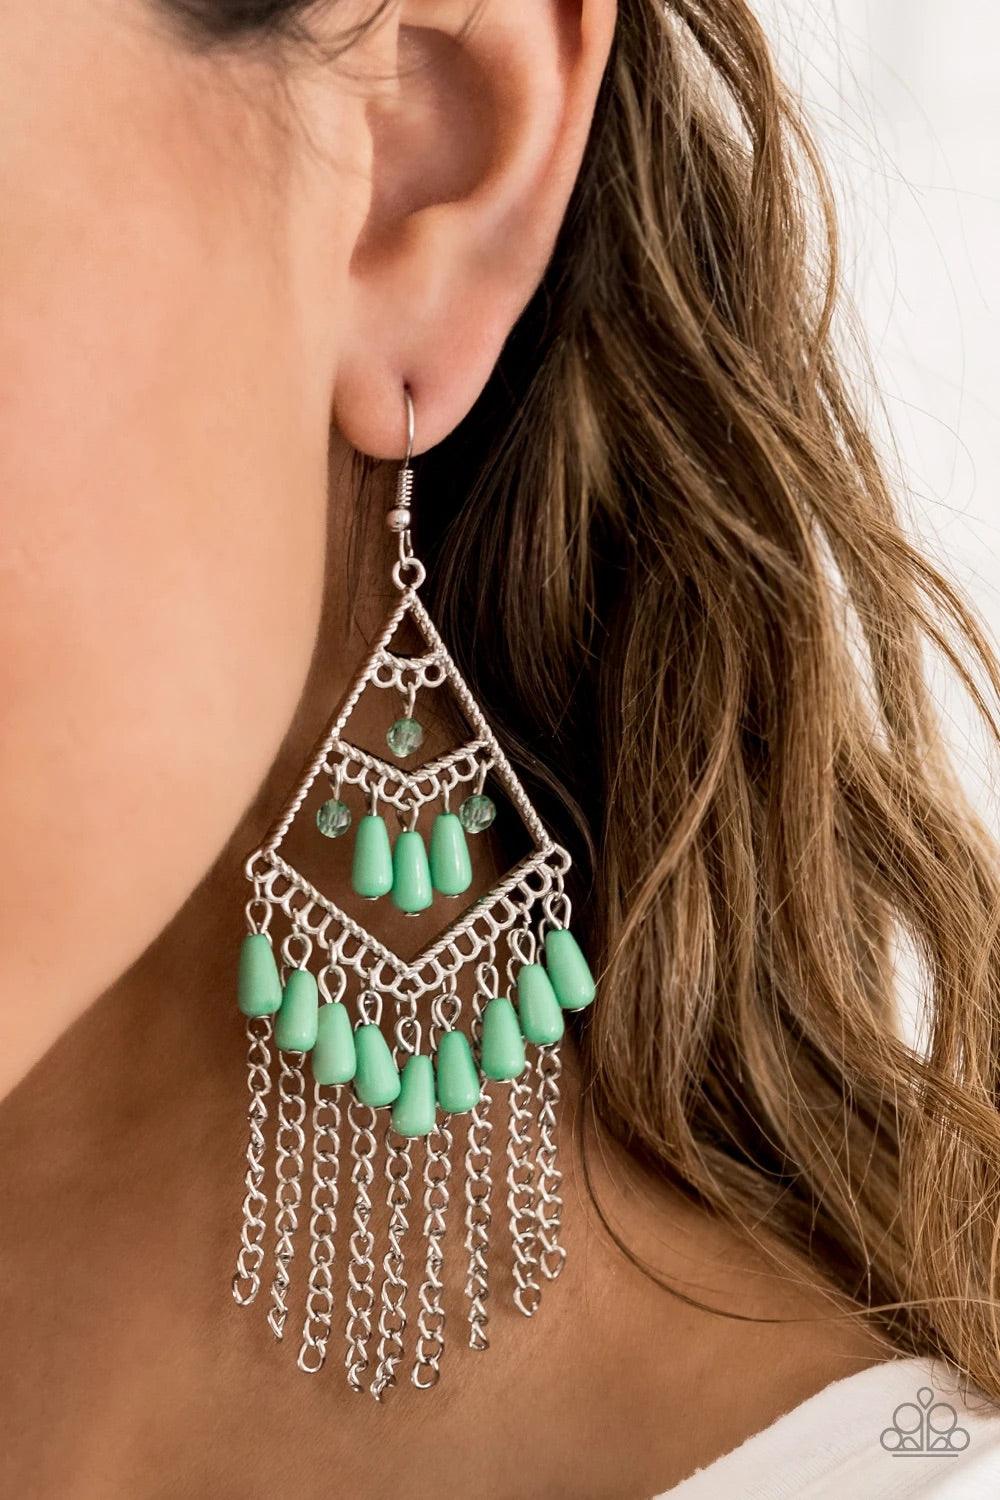 Paparazzi Accessories Trending Transcendence - Green Infused with a tapered silver chain fringe, green teardrop beads swing from the bottom of a shiny silver frame. Opaque and solid green beads swing from the top and middle of a stacked frame for a season